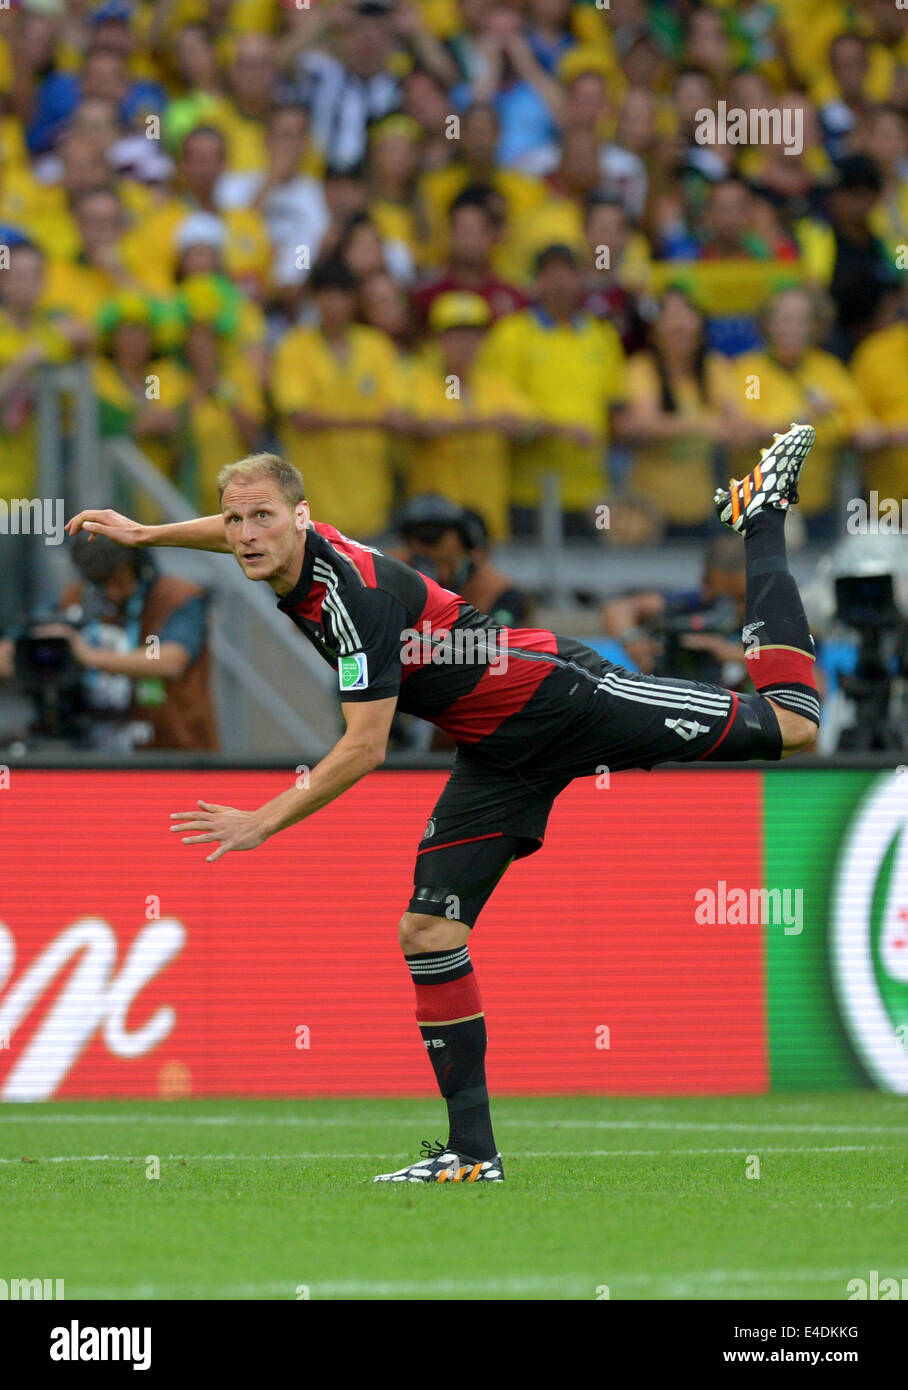 Belo Horizonte, Brazil. 08th July, 2014. Germany's Benedikt Hoewedes during the FIFA World Cup 2014 semi-final soccer match between Brazil and Germany at Estadio Mineirao in Belo Horizonte, Brazil, 08 July 2014. Photo: Thomas Eisenhuth/dpa/Alamy Live News Stock Photo